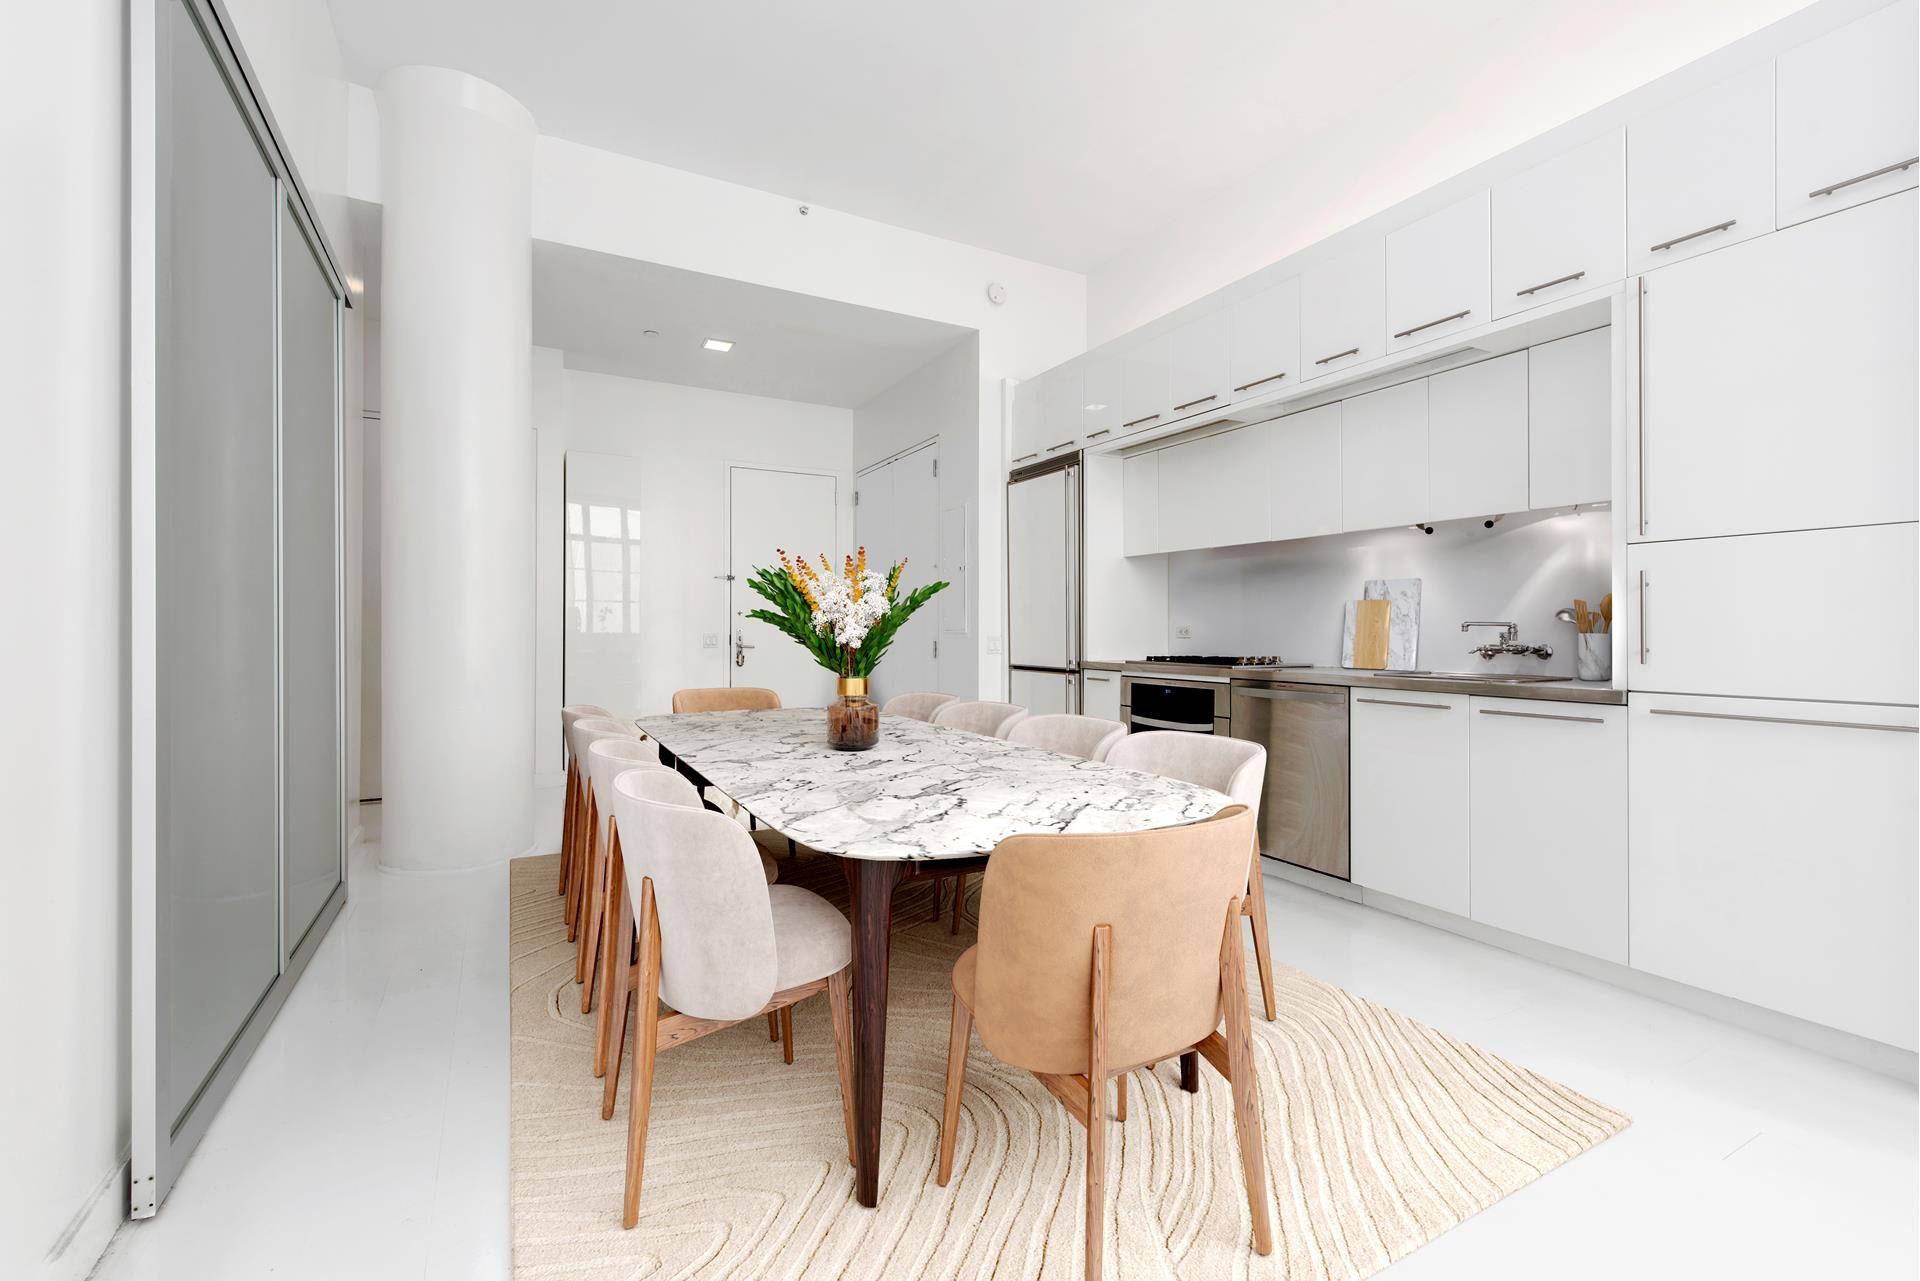 Now available is one of the best LOFT layouts, like a 1 Bedroom, at the luxurious Arris Lofts Condominium in Long Island City, perfectly located on Court Square.